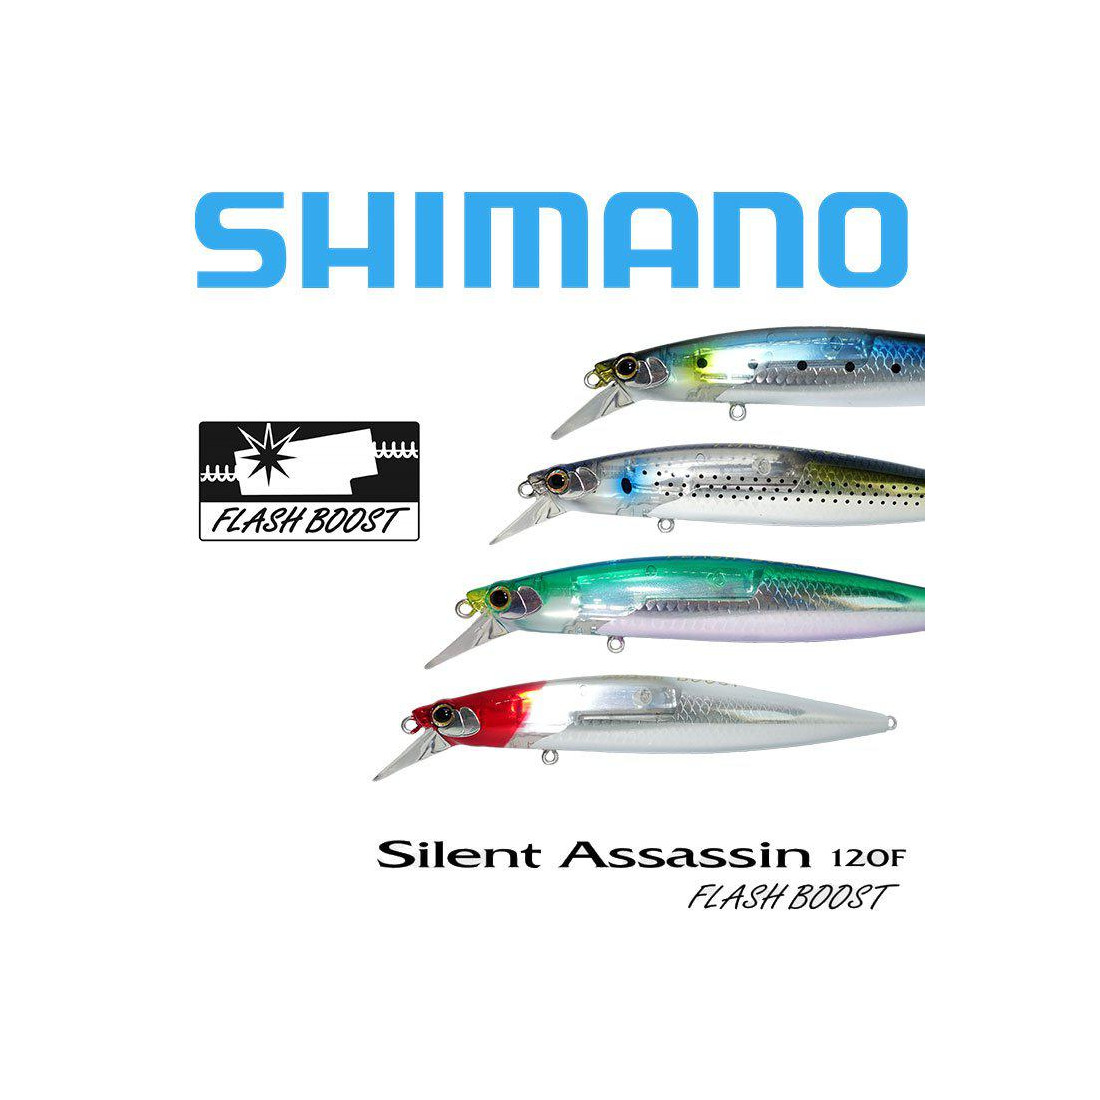 Details about   Shimano XM-112T Exsence Silent Assassin Flash Boost 129F FB Floating Lure 005 